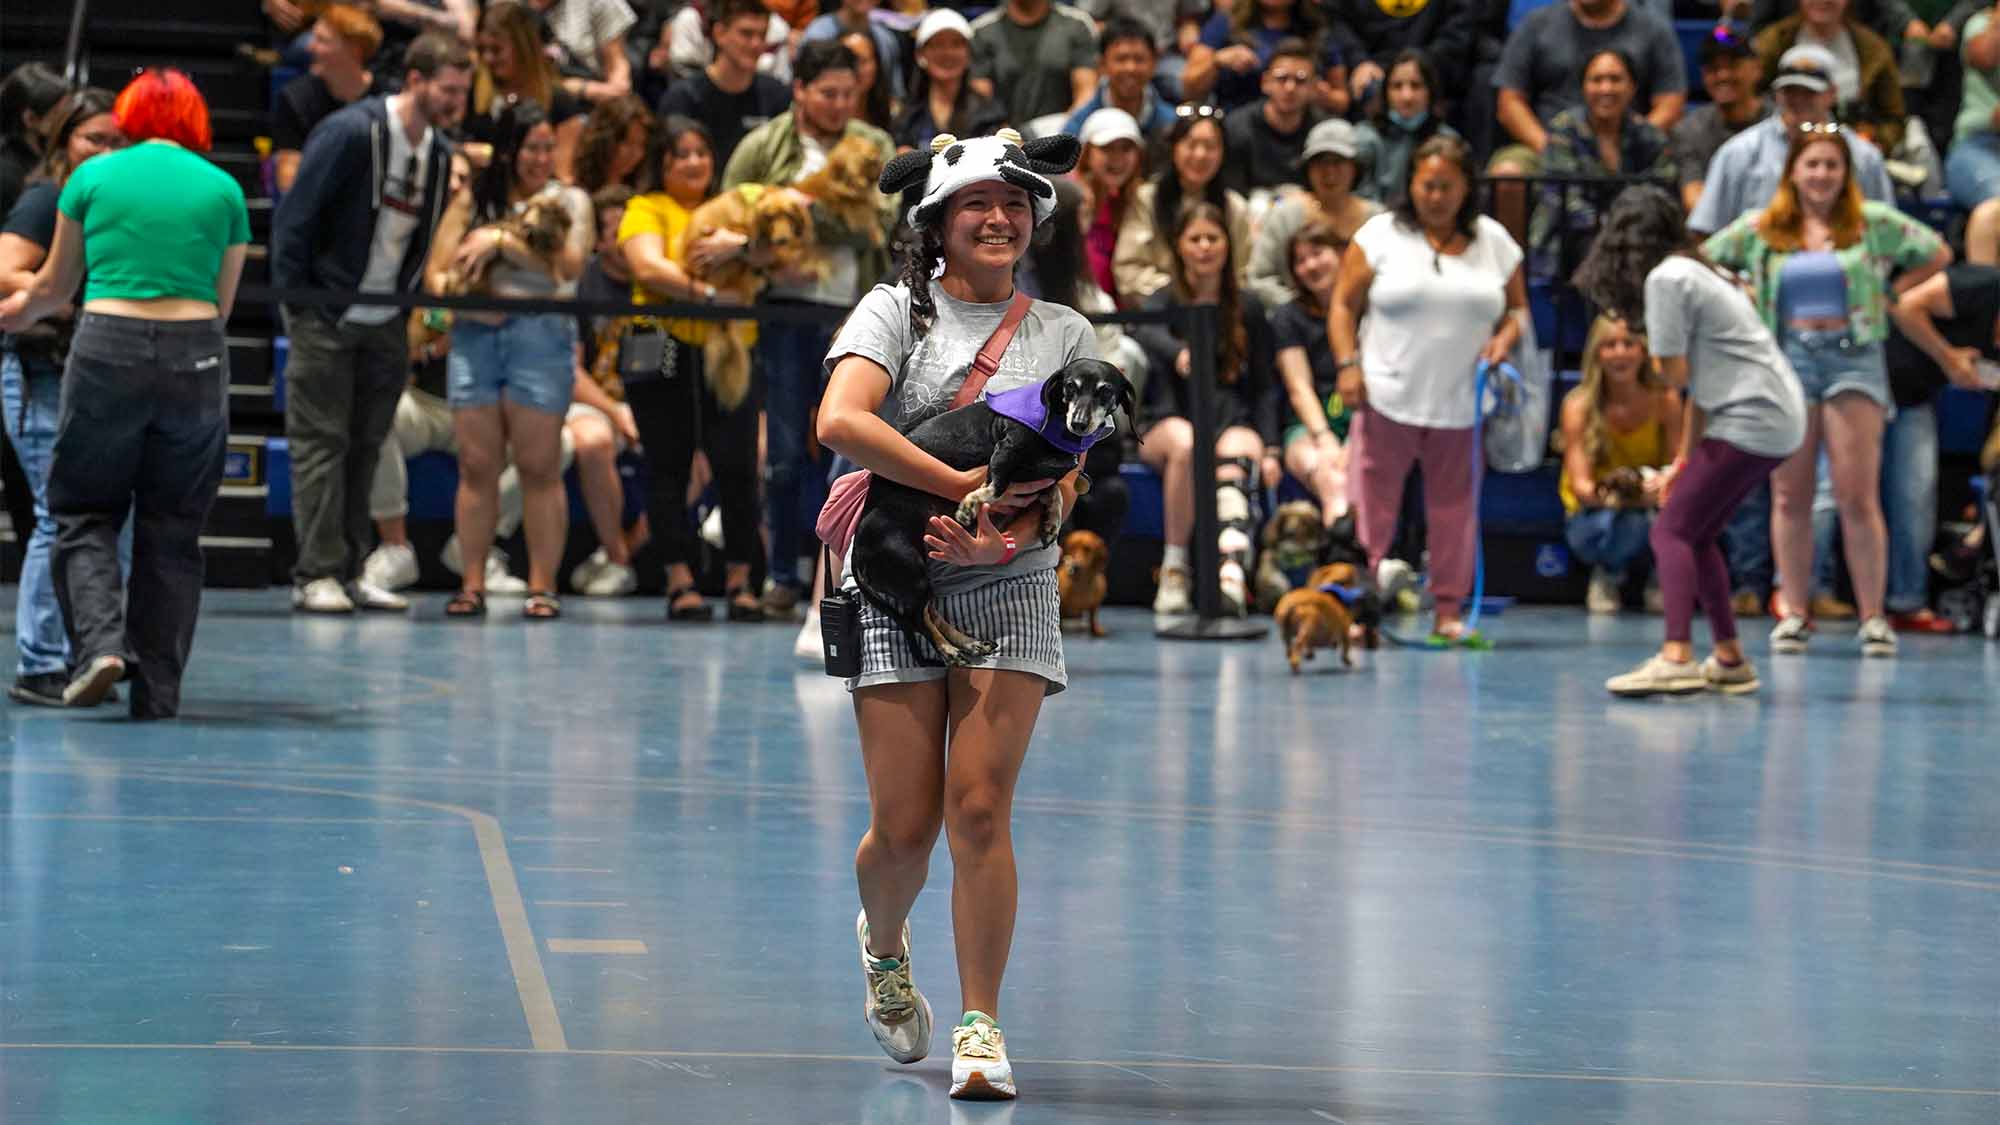 Student carries dog at Doxie Derby